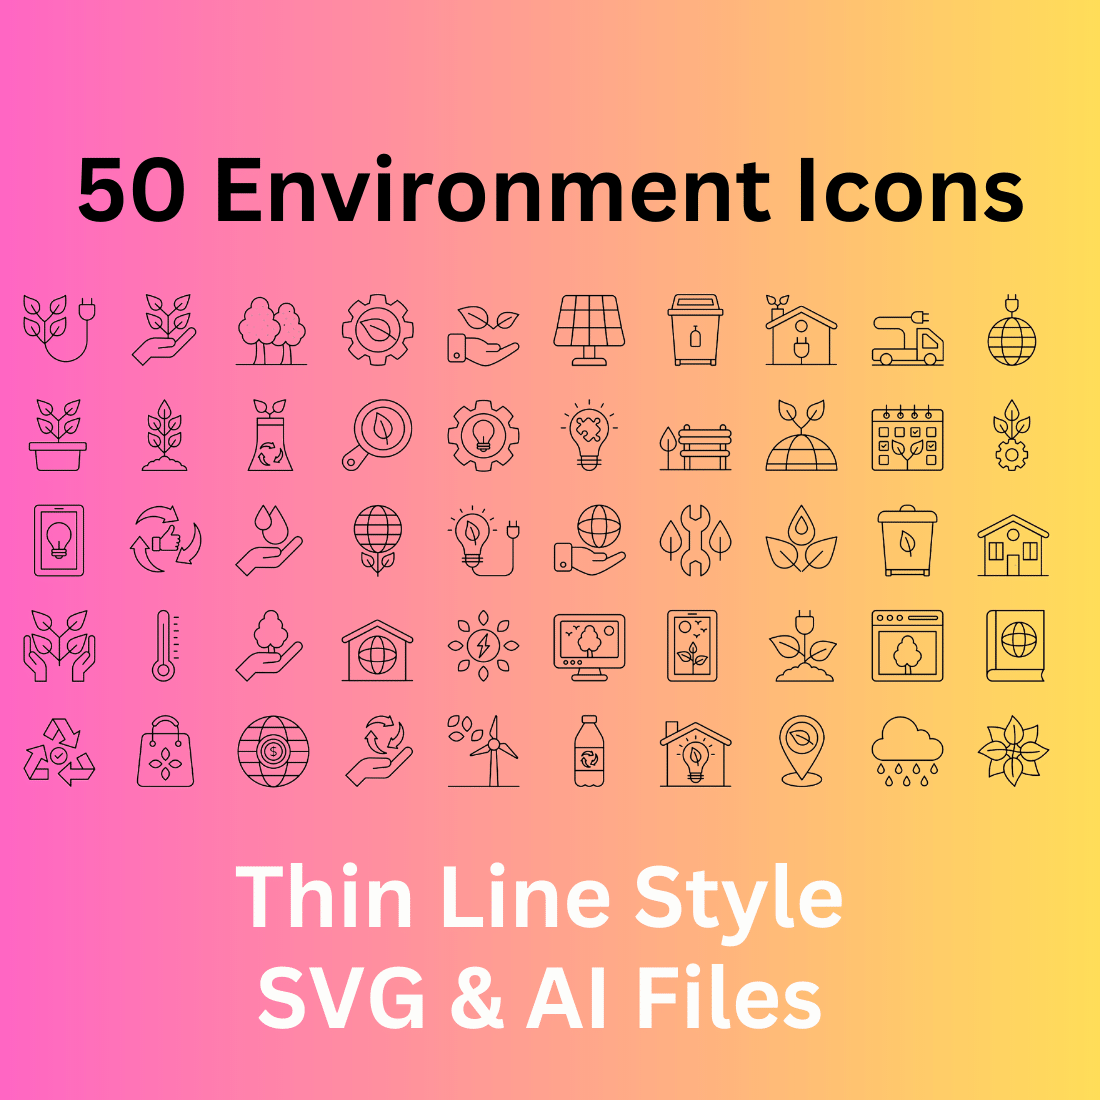 Environment Icon Set 50 Outline Icons - SVG And AI Files cover image.